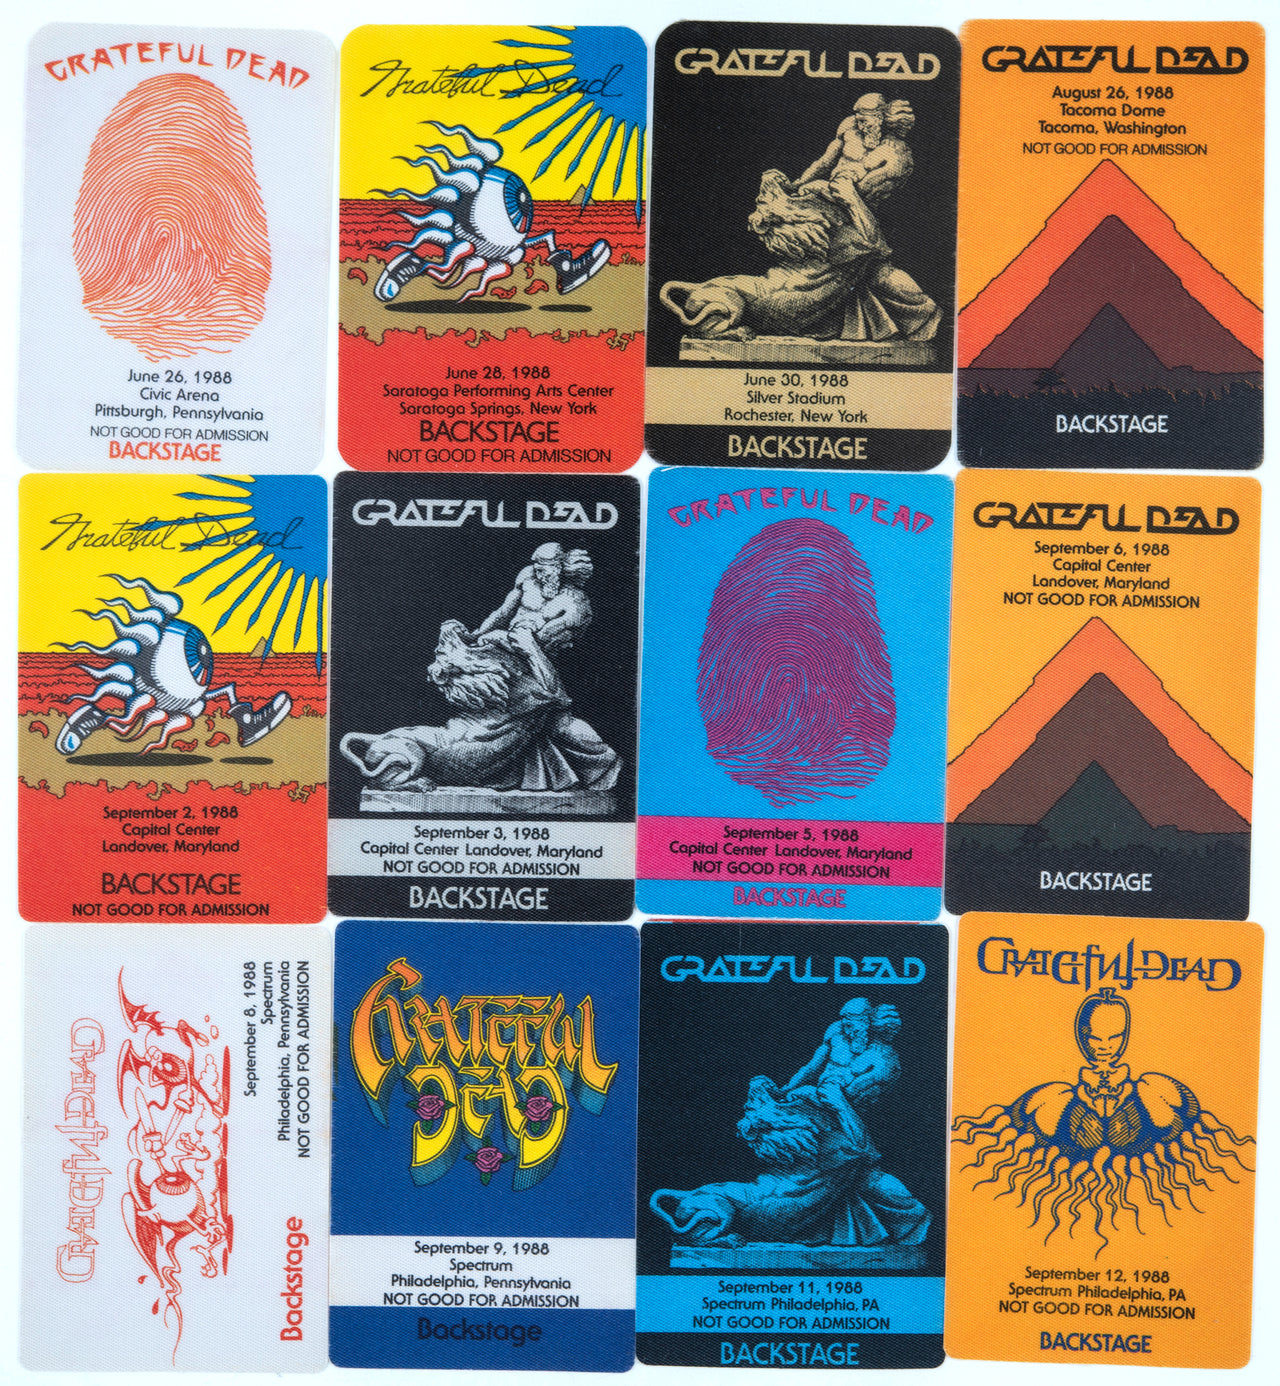 Grateful Dead Backstage Passes (6/26/1988 - 9/12/1988) from Dan Healy